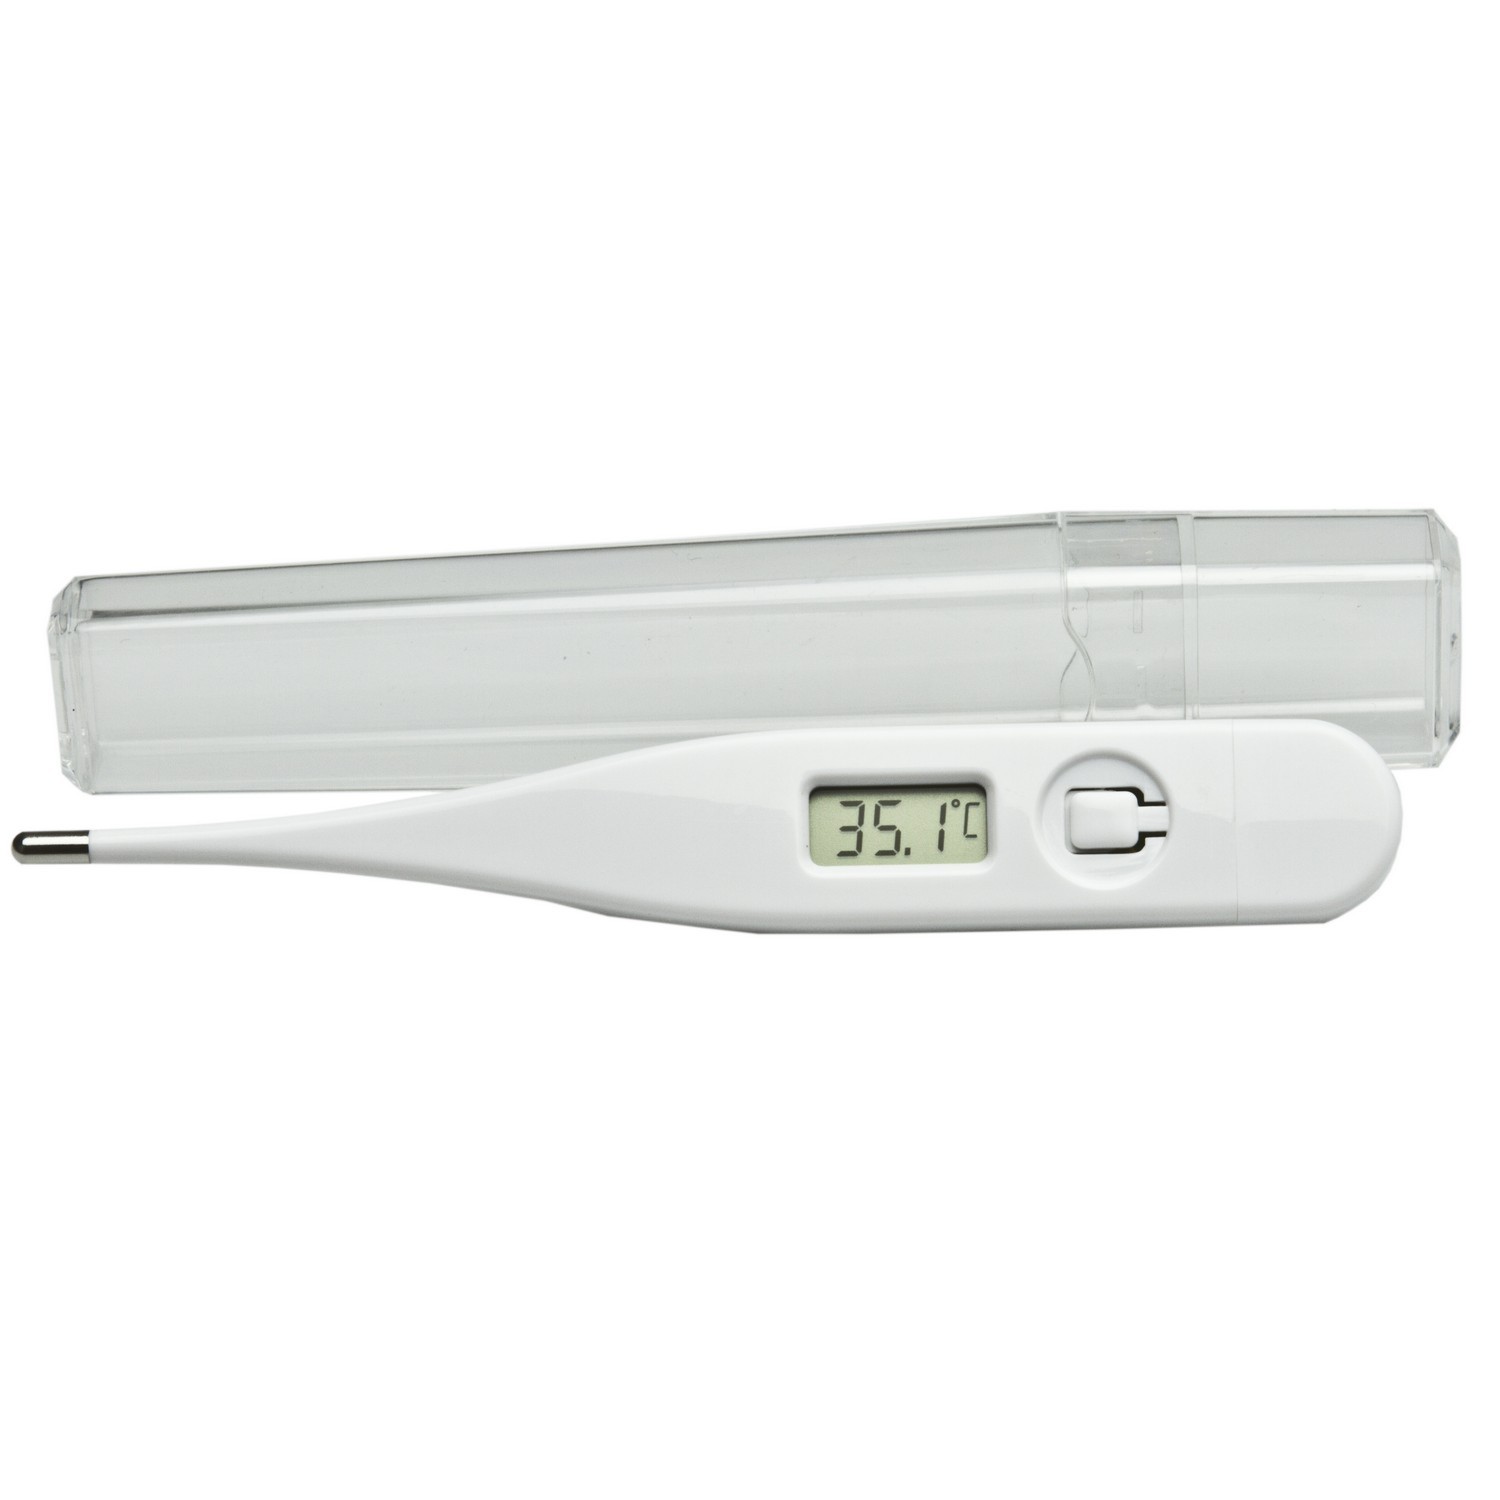 Digital Thermometer Image 1